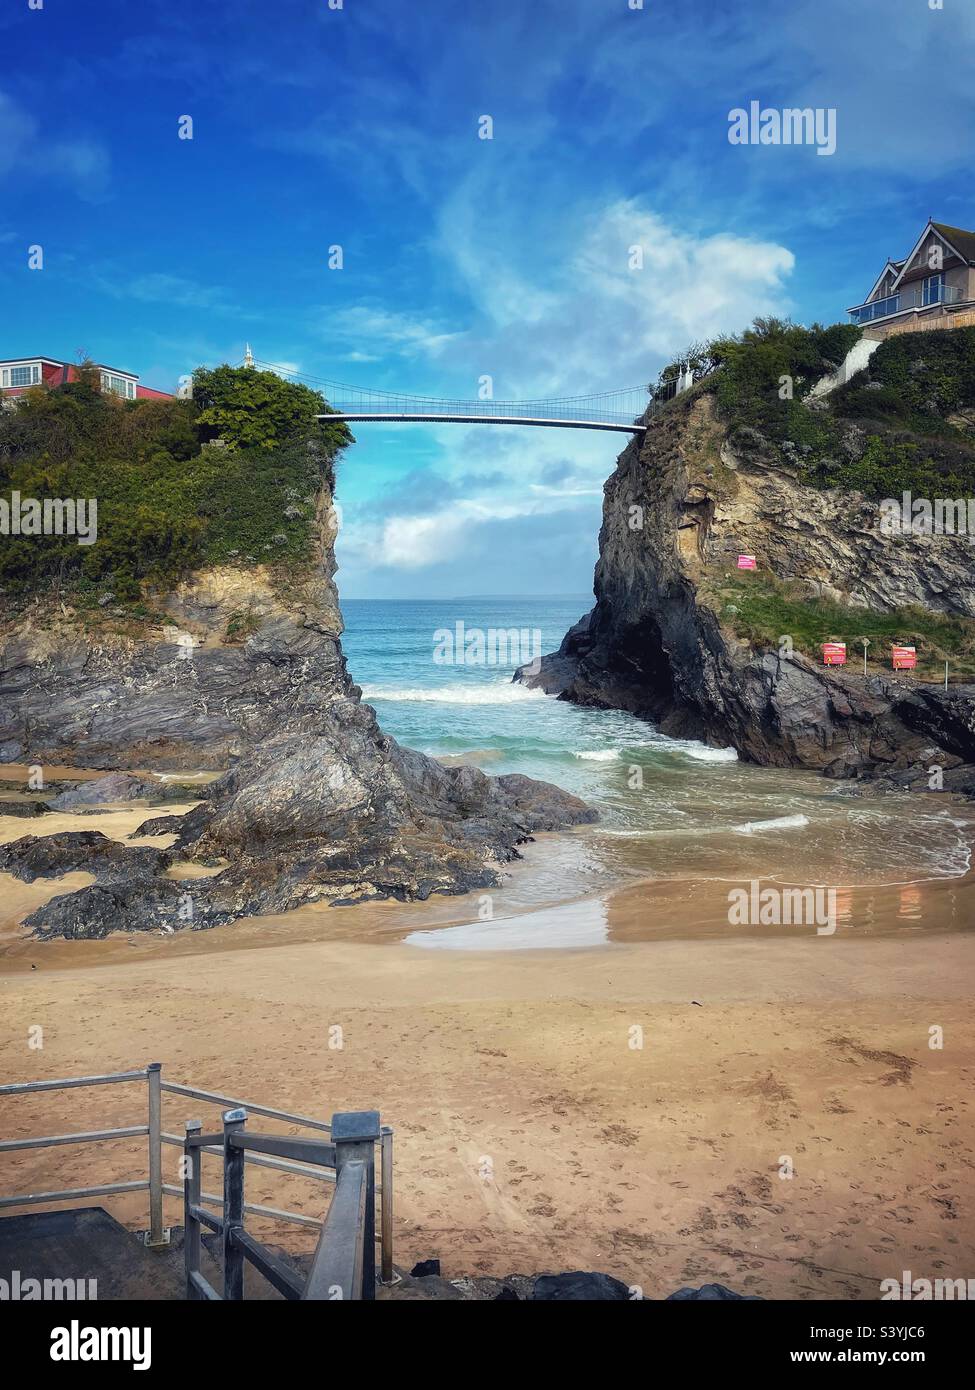 The Island house with connecting bridge, Newquay, North Cornwall. Stock Photo